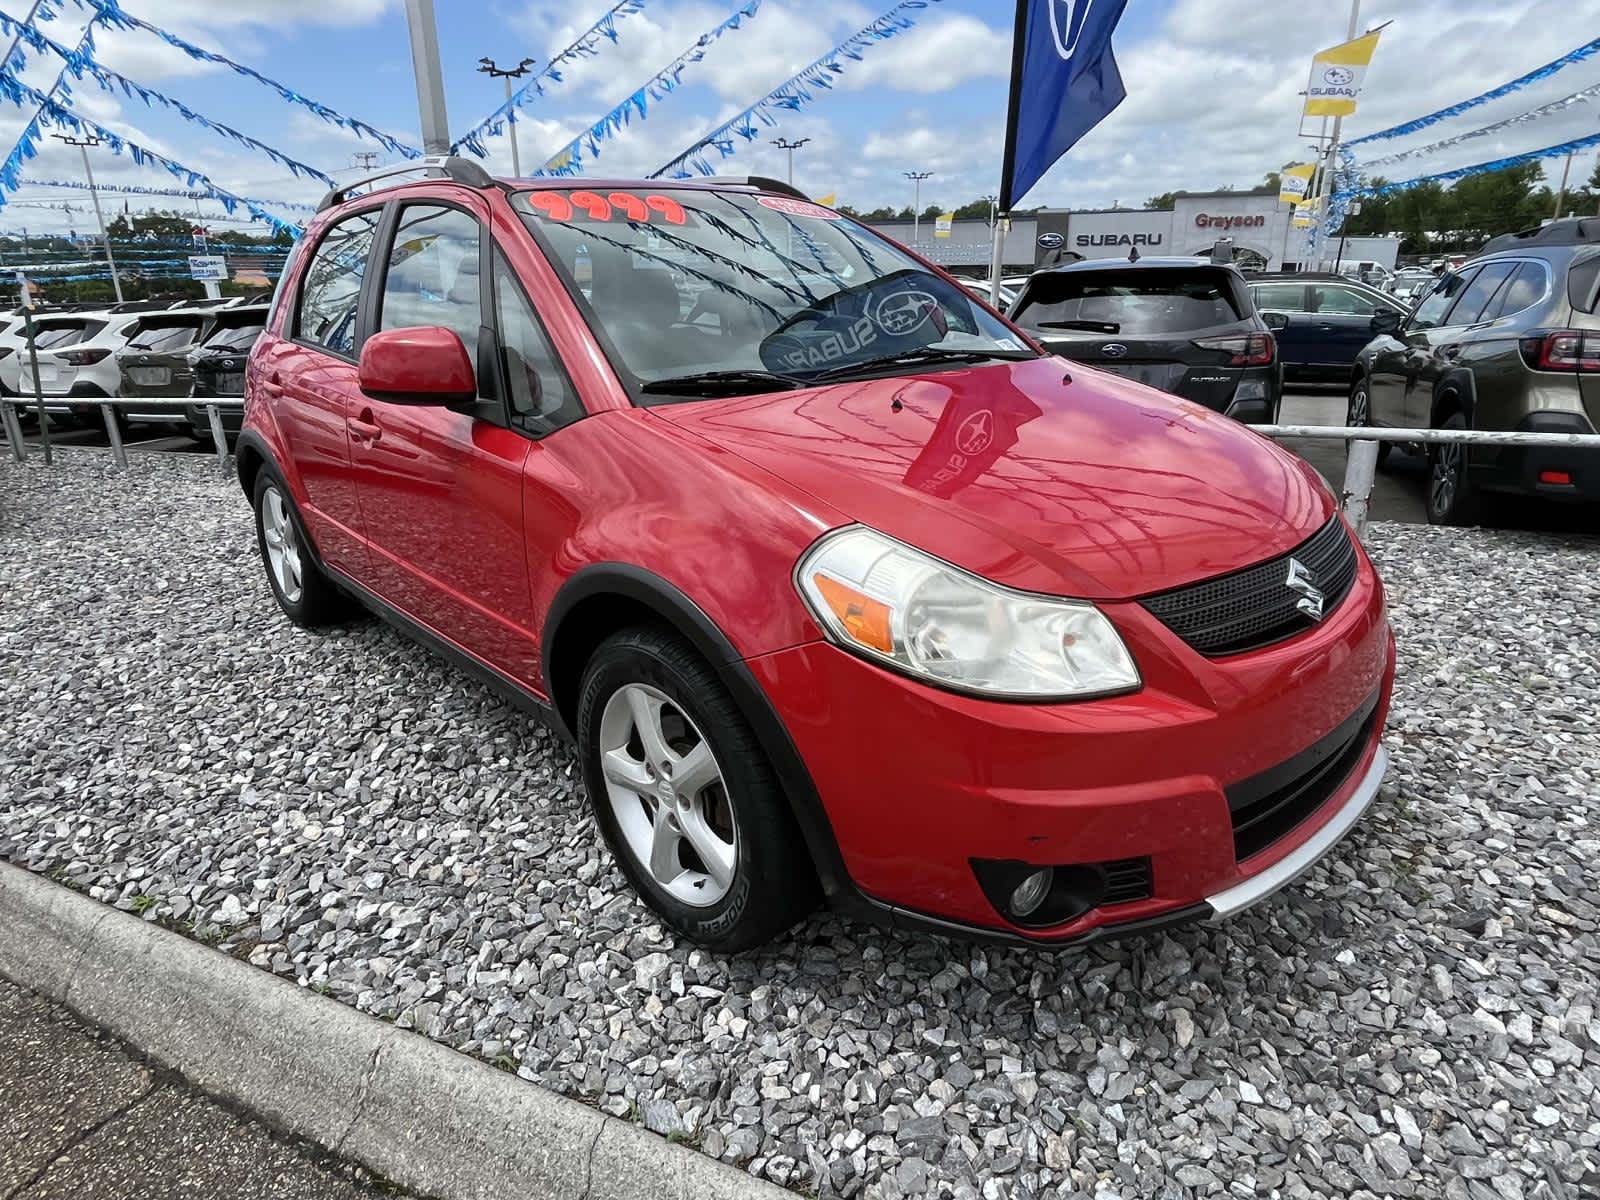 Used 2009 Suzuki SX4 Crossover Touring with VIN JS2YB417296201690 for sale in Knoxville, TN